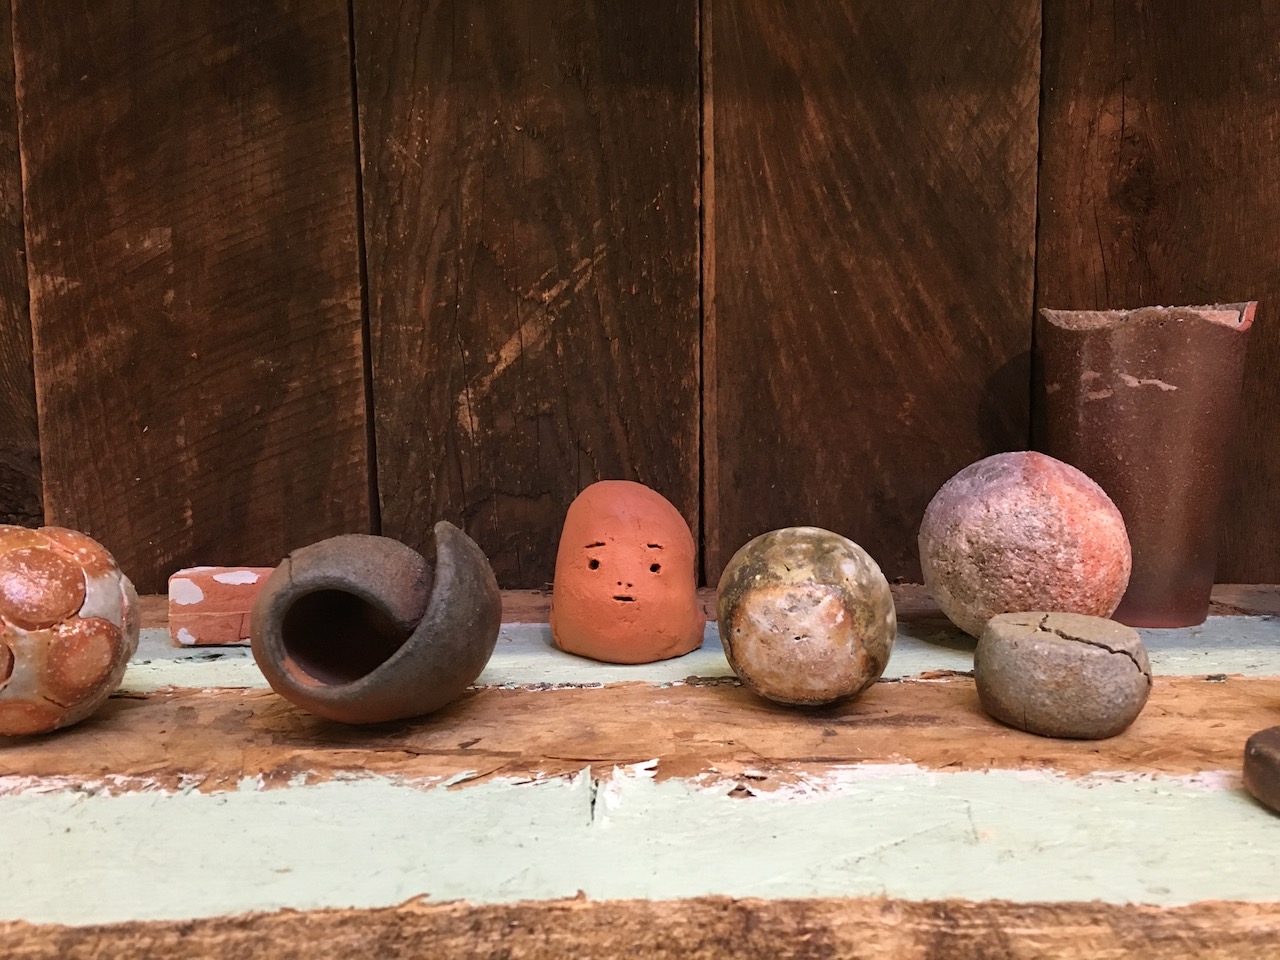 Roughly formed ceramic objects on a wooden surface. Spheres, a broken cup, and in the center a small unglazed piece with minimal markings of a face cut into it.